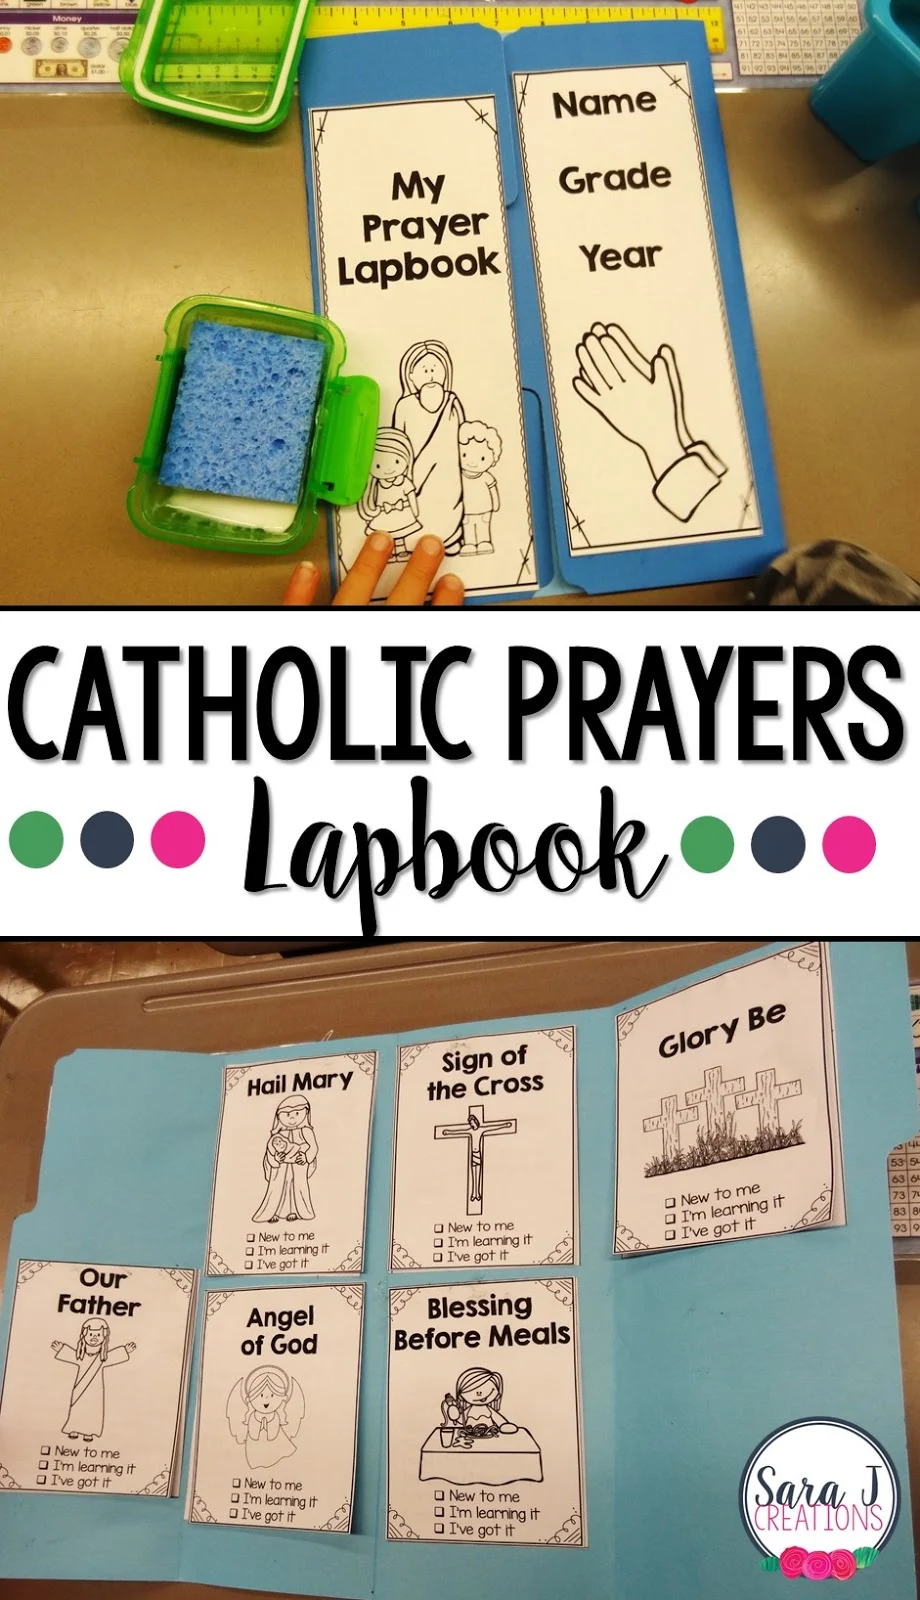 Catholic Prayers Lapbook is great for helping kids to pray and and memorize prayers.